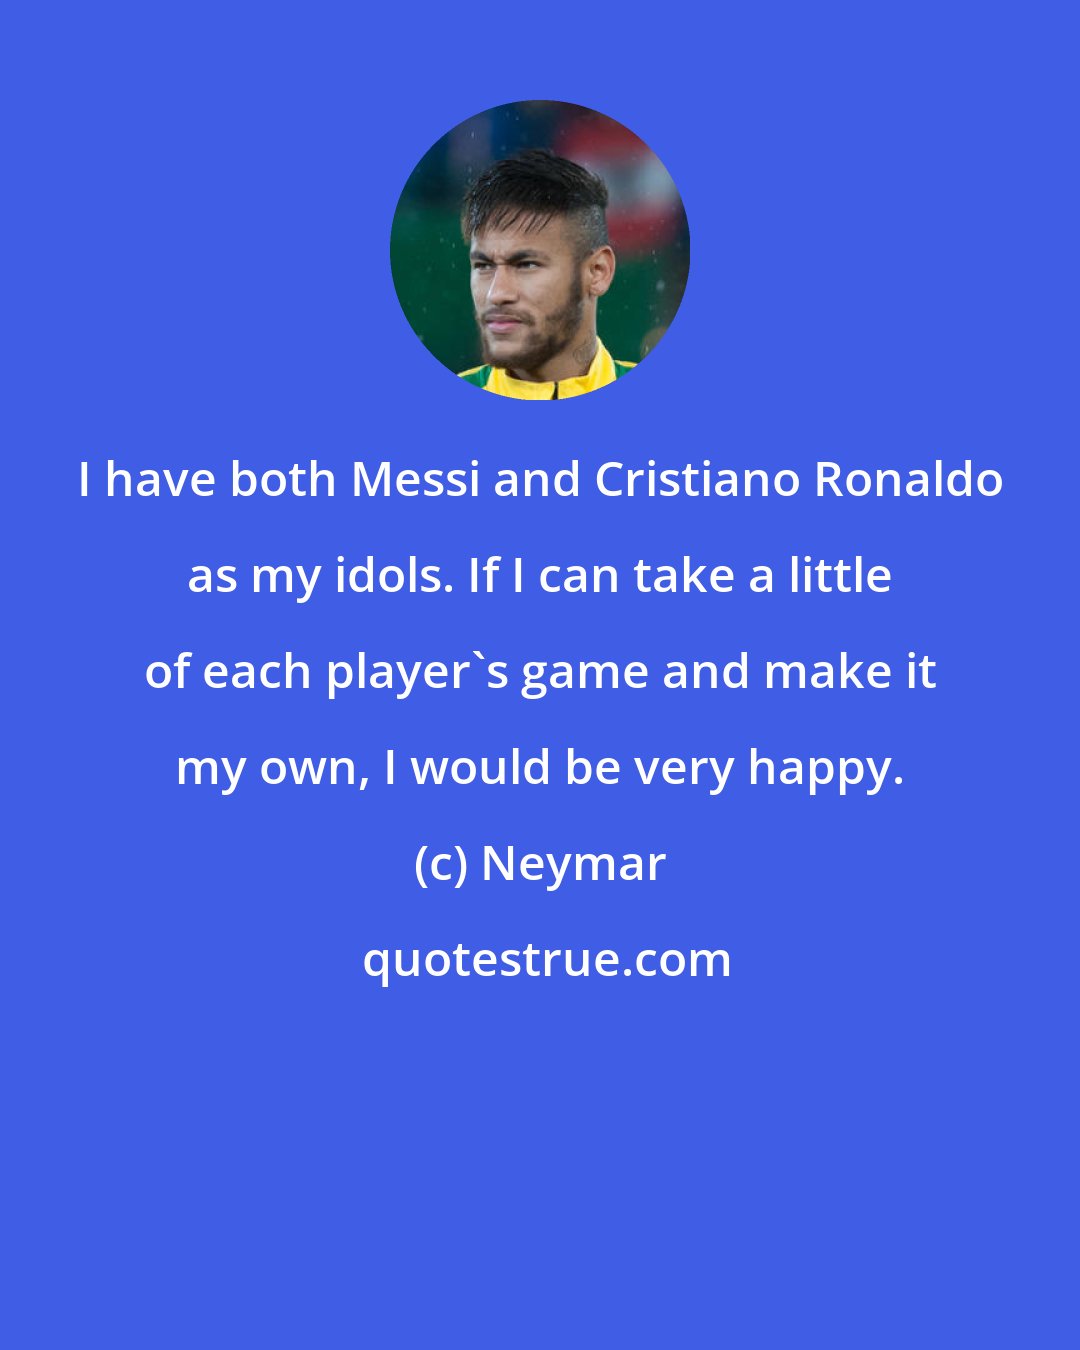 Neymar: I have both Messi and Cristiano Ronaldo as my idols. If I can take a little of each player's game and make it my own, I would be very happy.